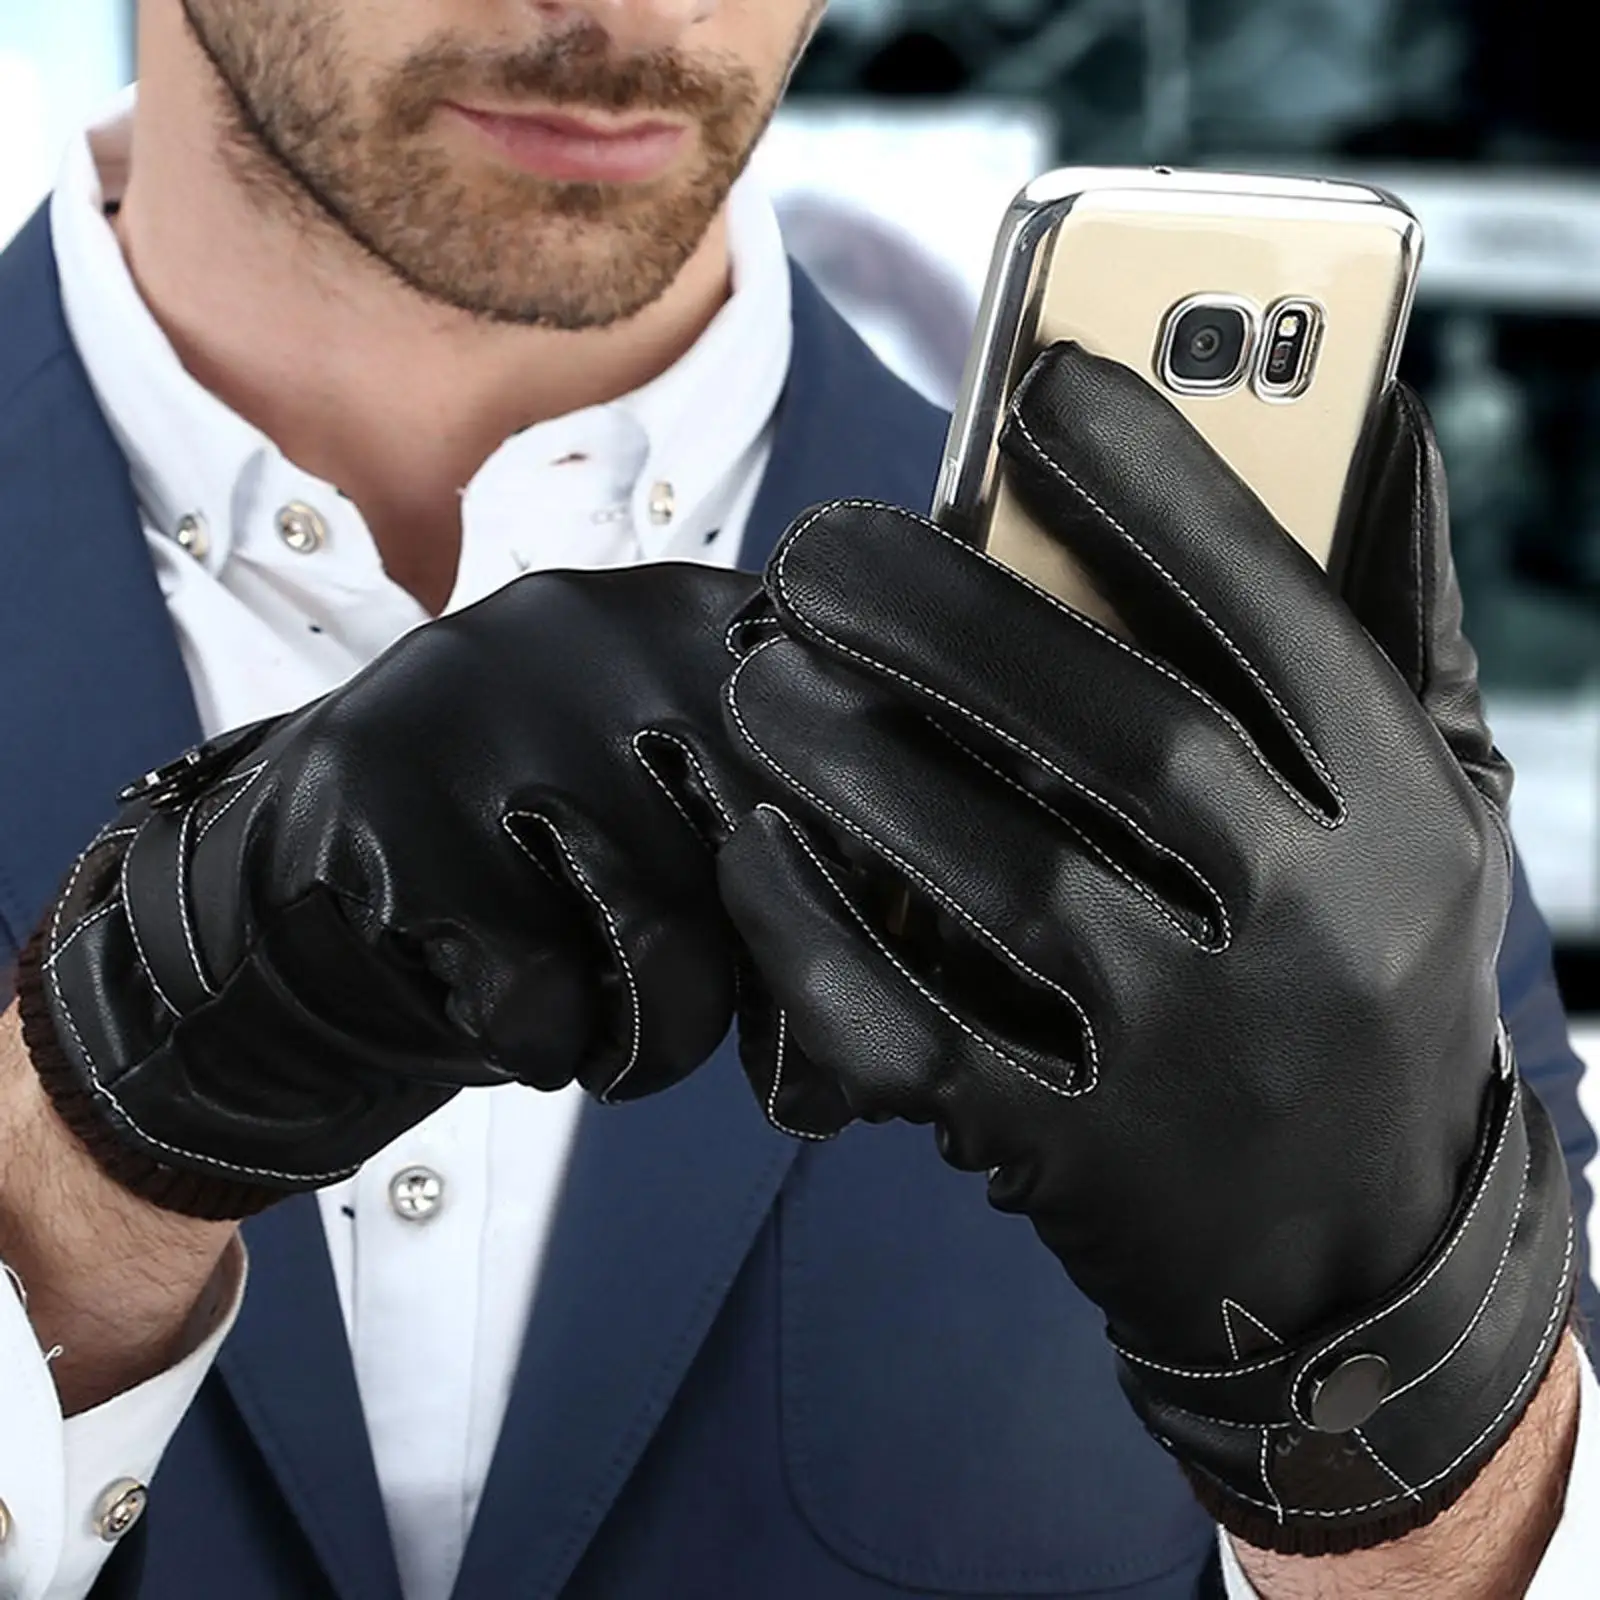 Touchscreen Gloves PU Leather Waterproof Men Winter Gloves for Motorcycle